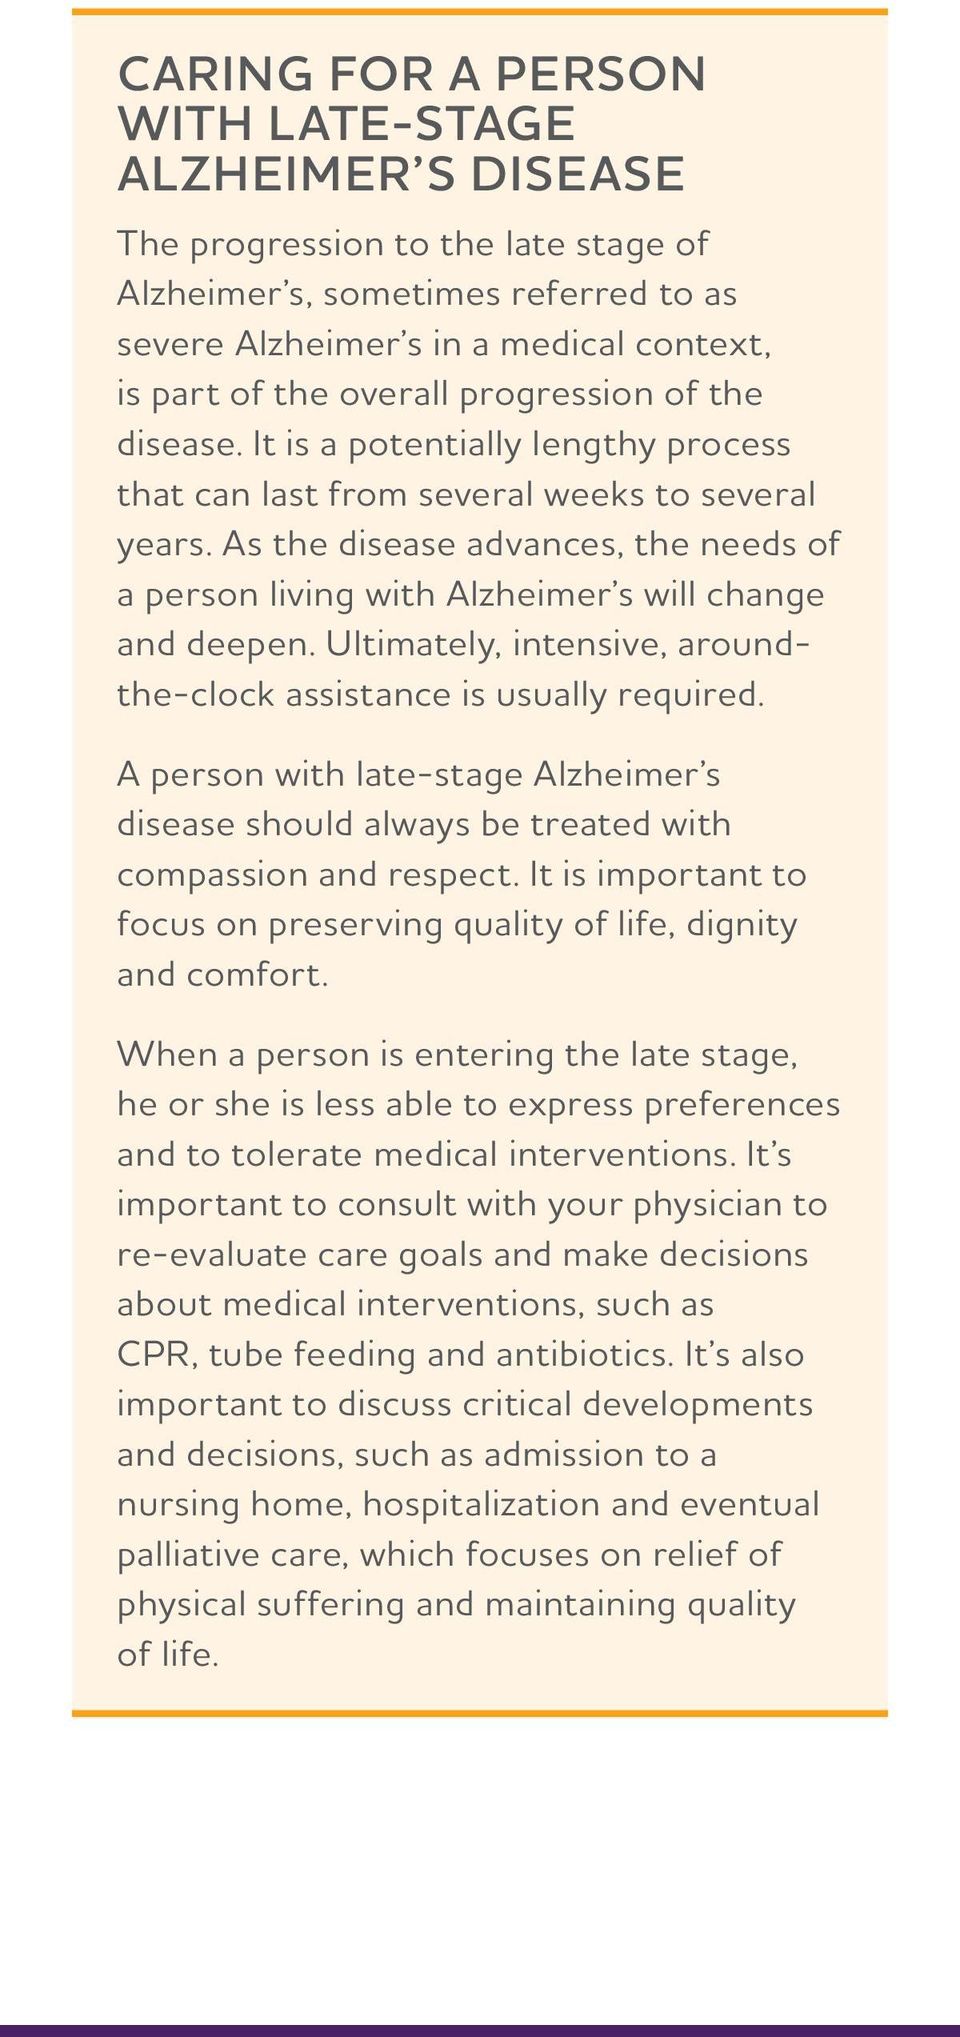 As the disease advances, the needs of a person living with Alzheimer s will change and deepen. Ultimately, intensive, aroundthe-clock assistance is usually required.